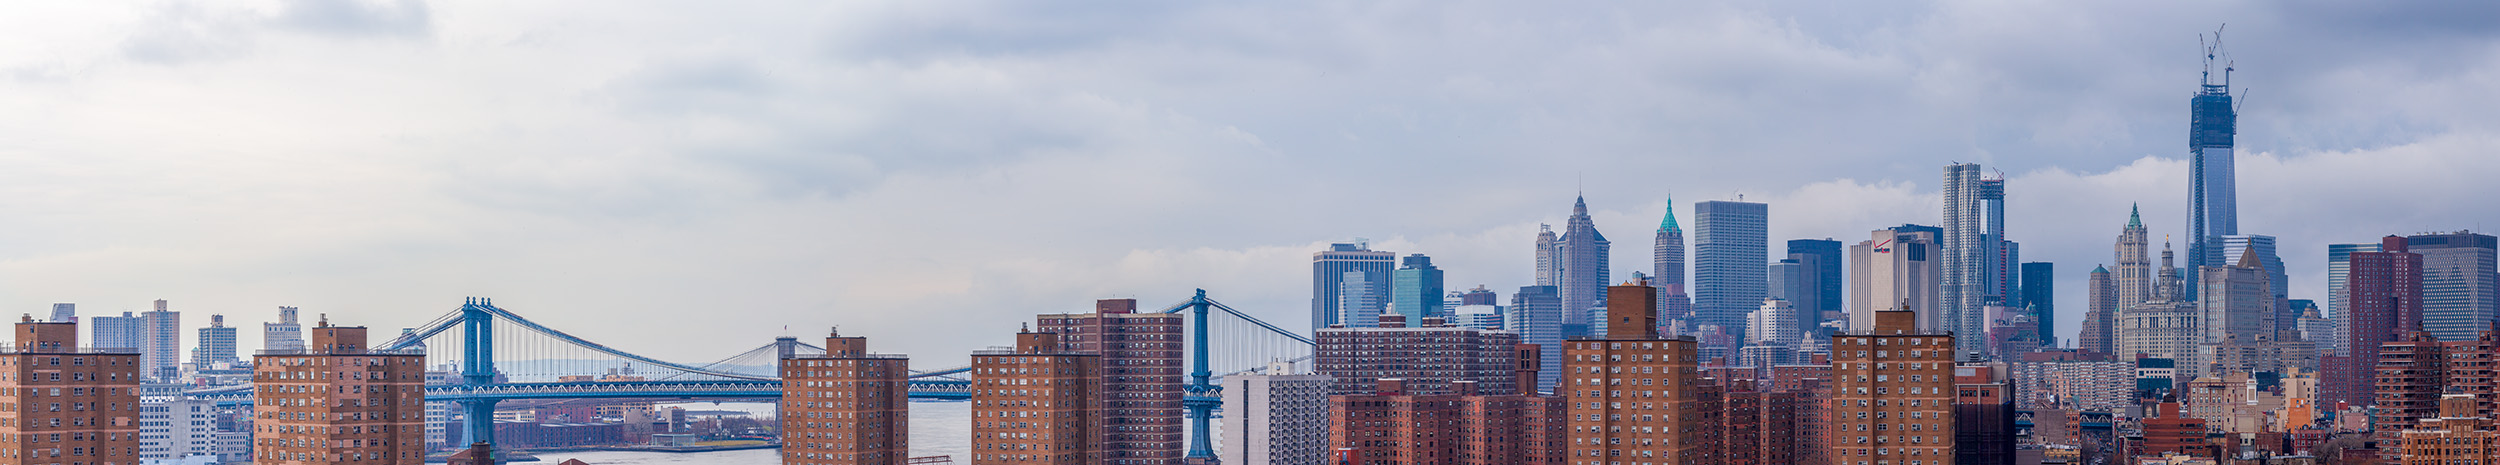 Captured from Eric's apartment balcony near the Manhattan Bridge, this stunning 20-image panoramic offers a sweeping view of...